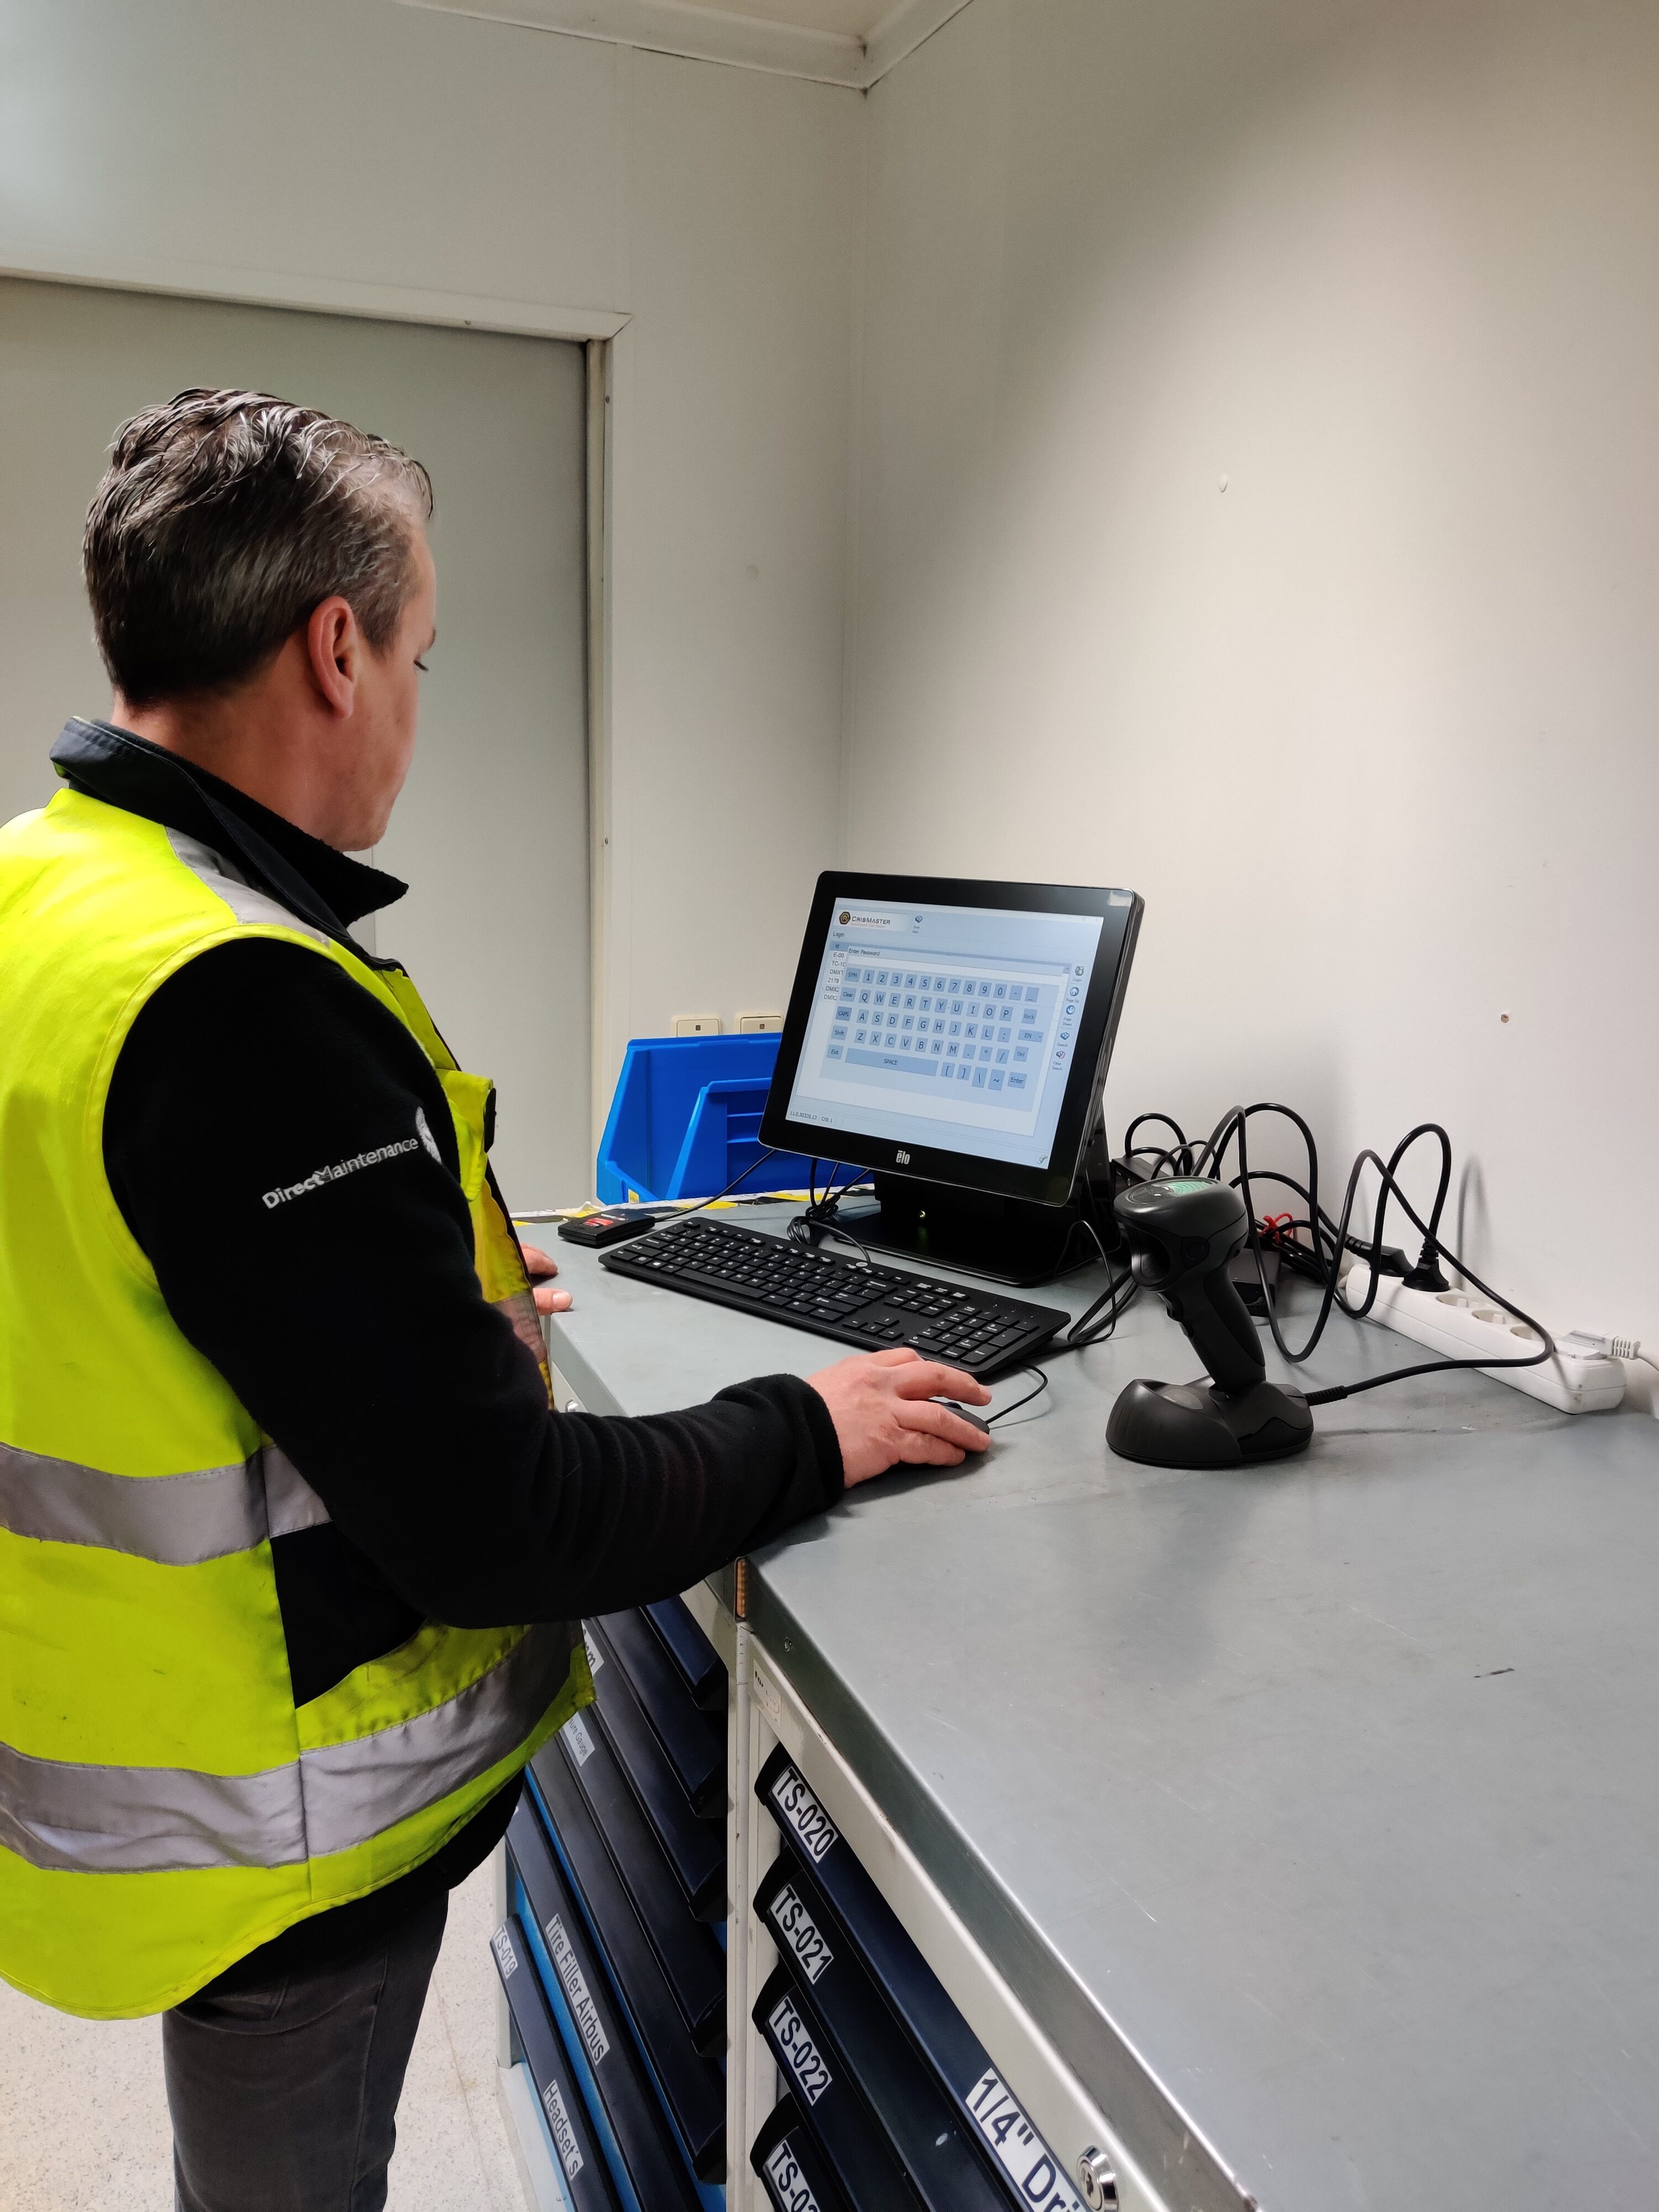 Direct Maintenance set up Cribmaster tool control system in TXL station